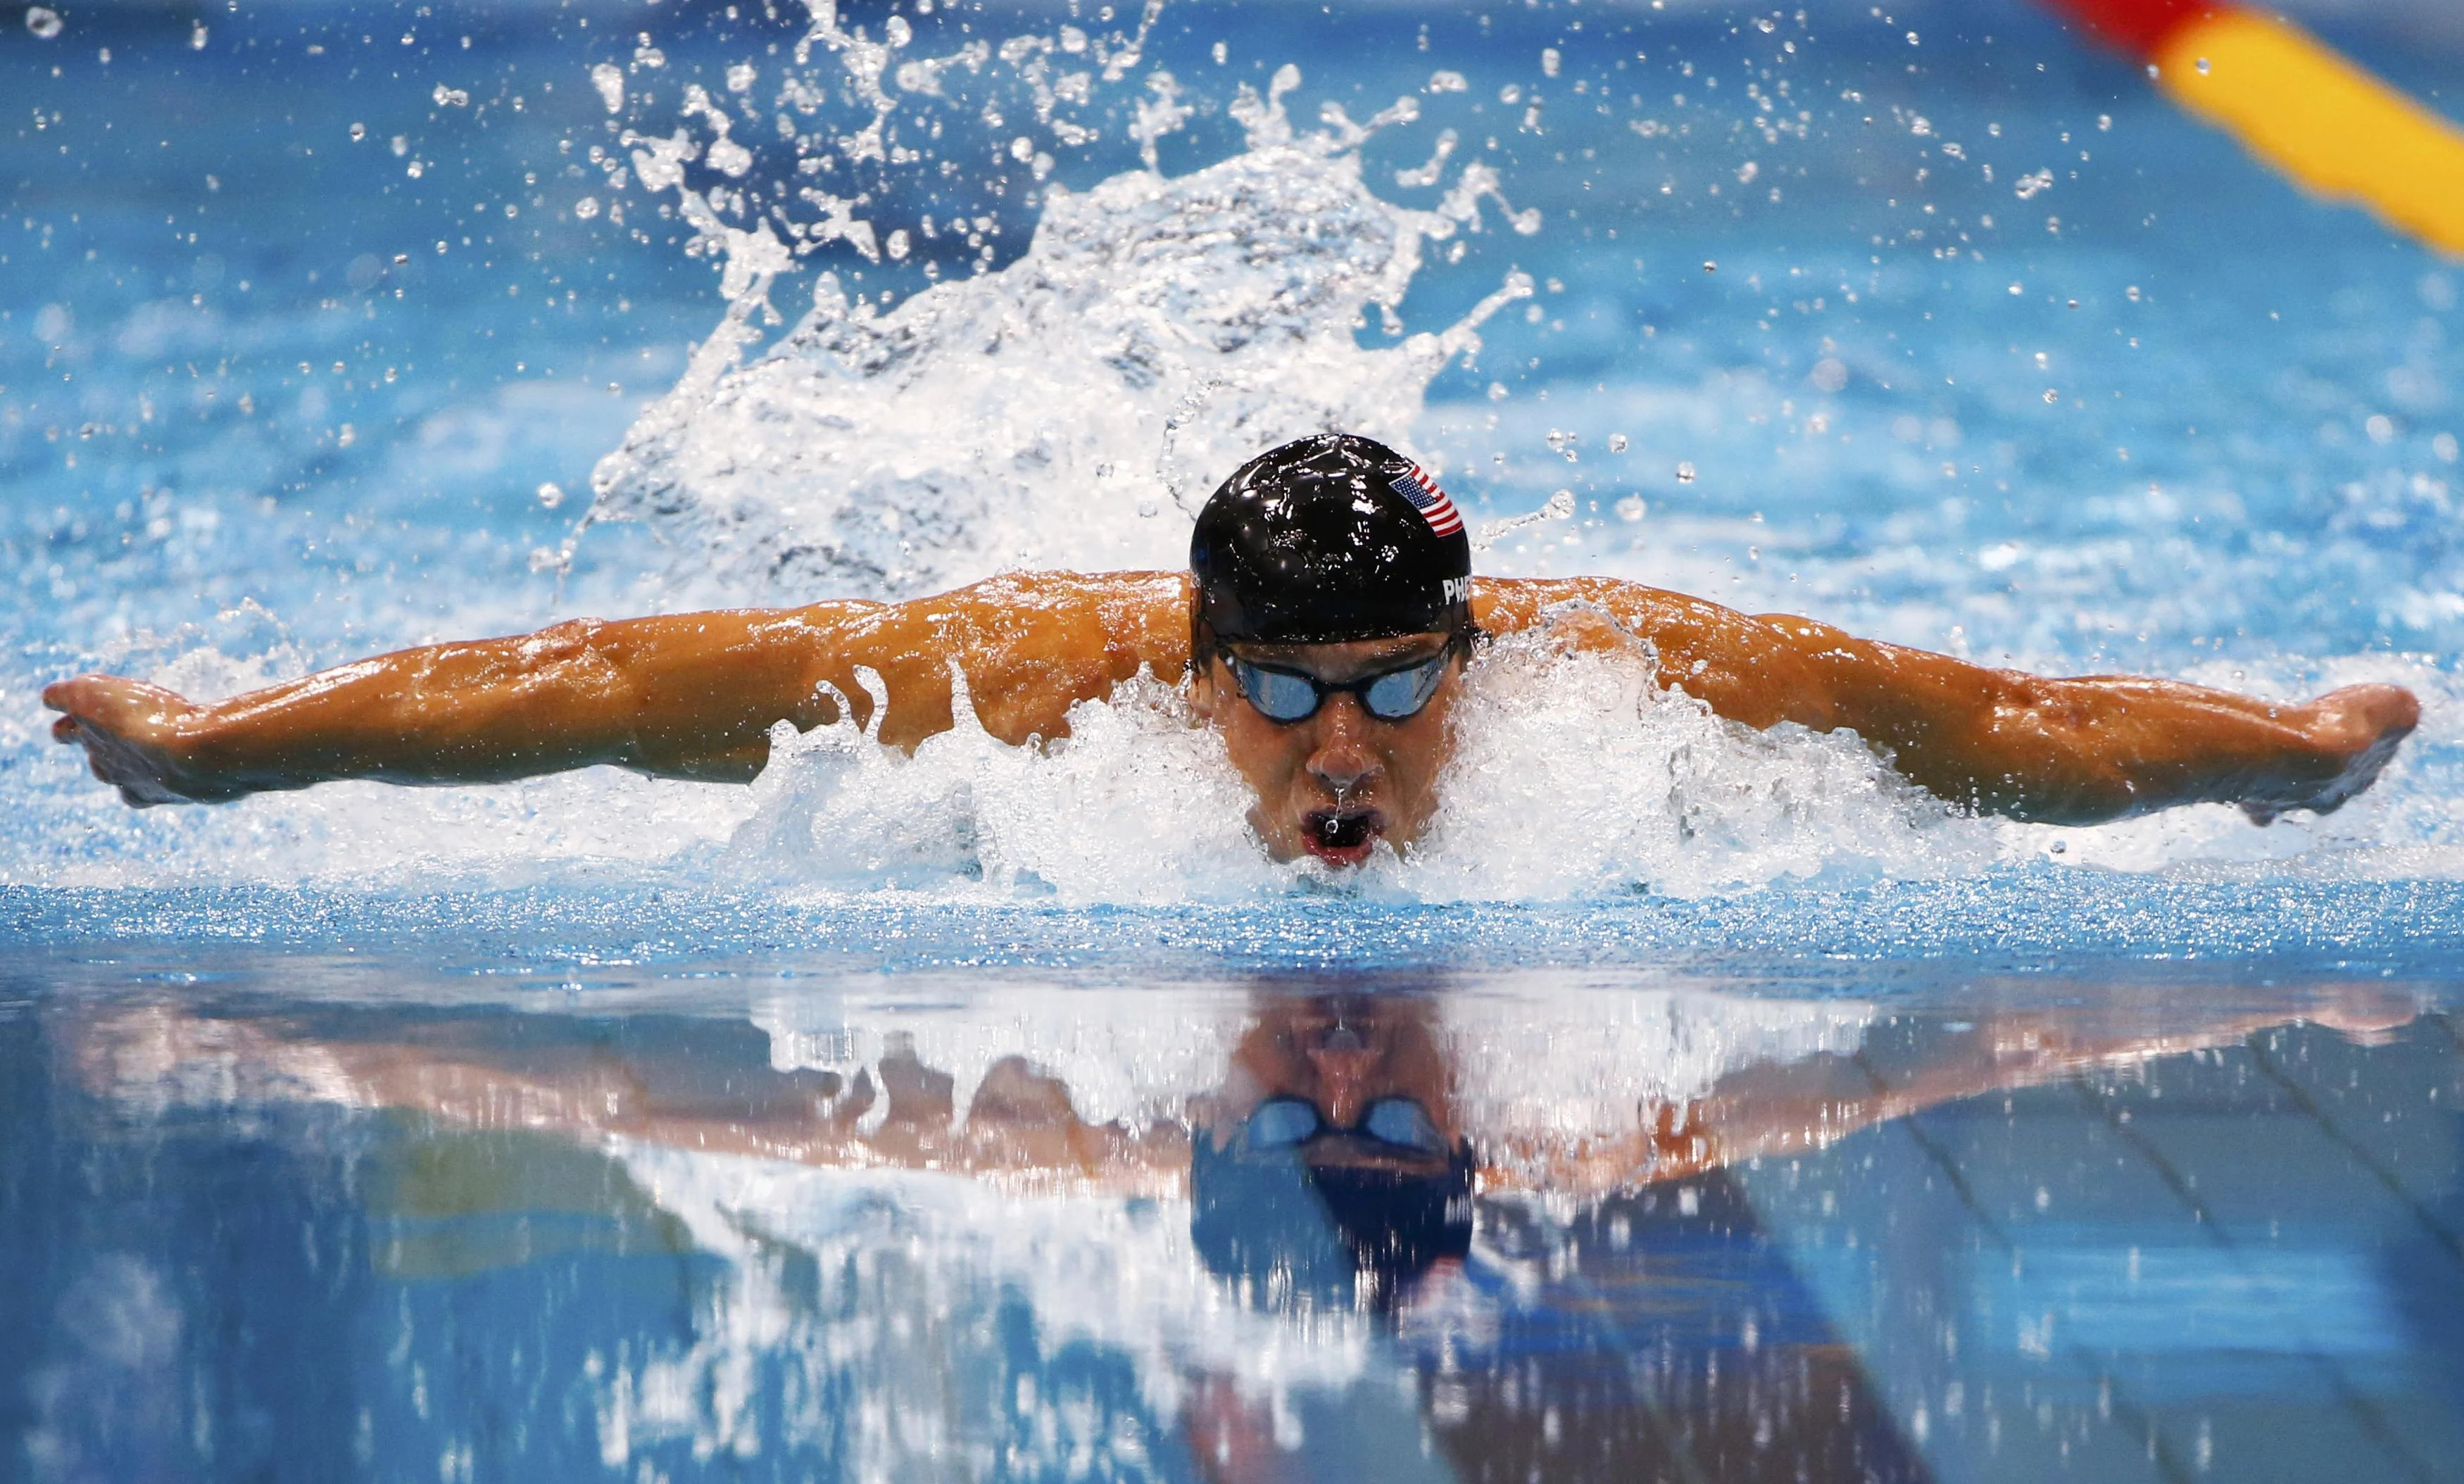 Swimming: An American professional butterfly stroke swimmer, Competitive water sports. 3500x2110 HD Background.